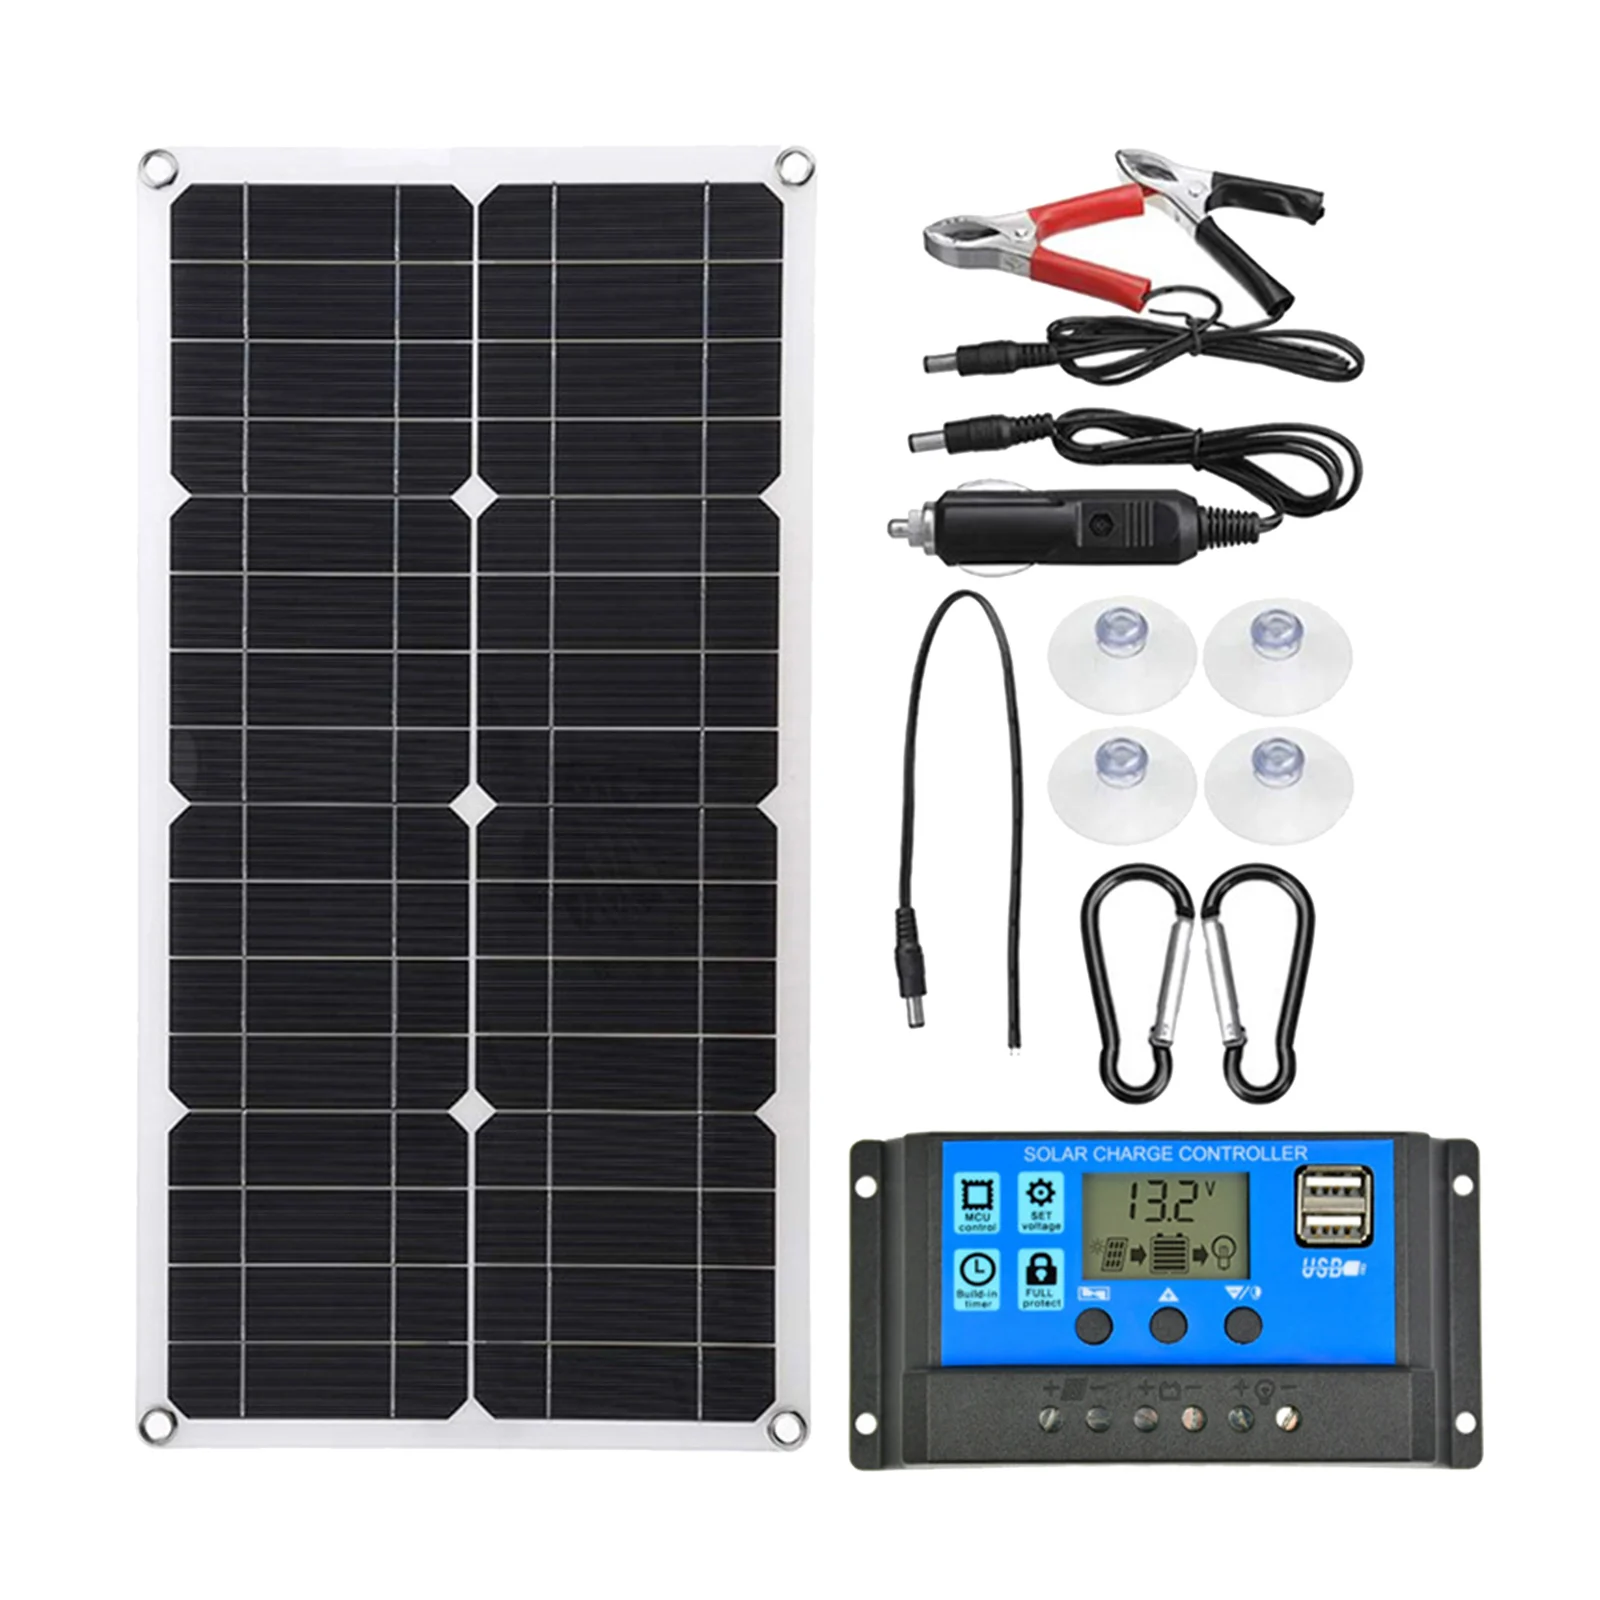 100 Watt Solar Panel Starter Kit with 130cm DC Male Cable for Boat, Caravan, RV and Other Off Grid Applications